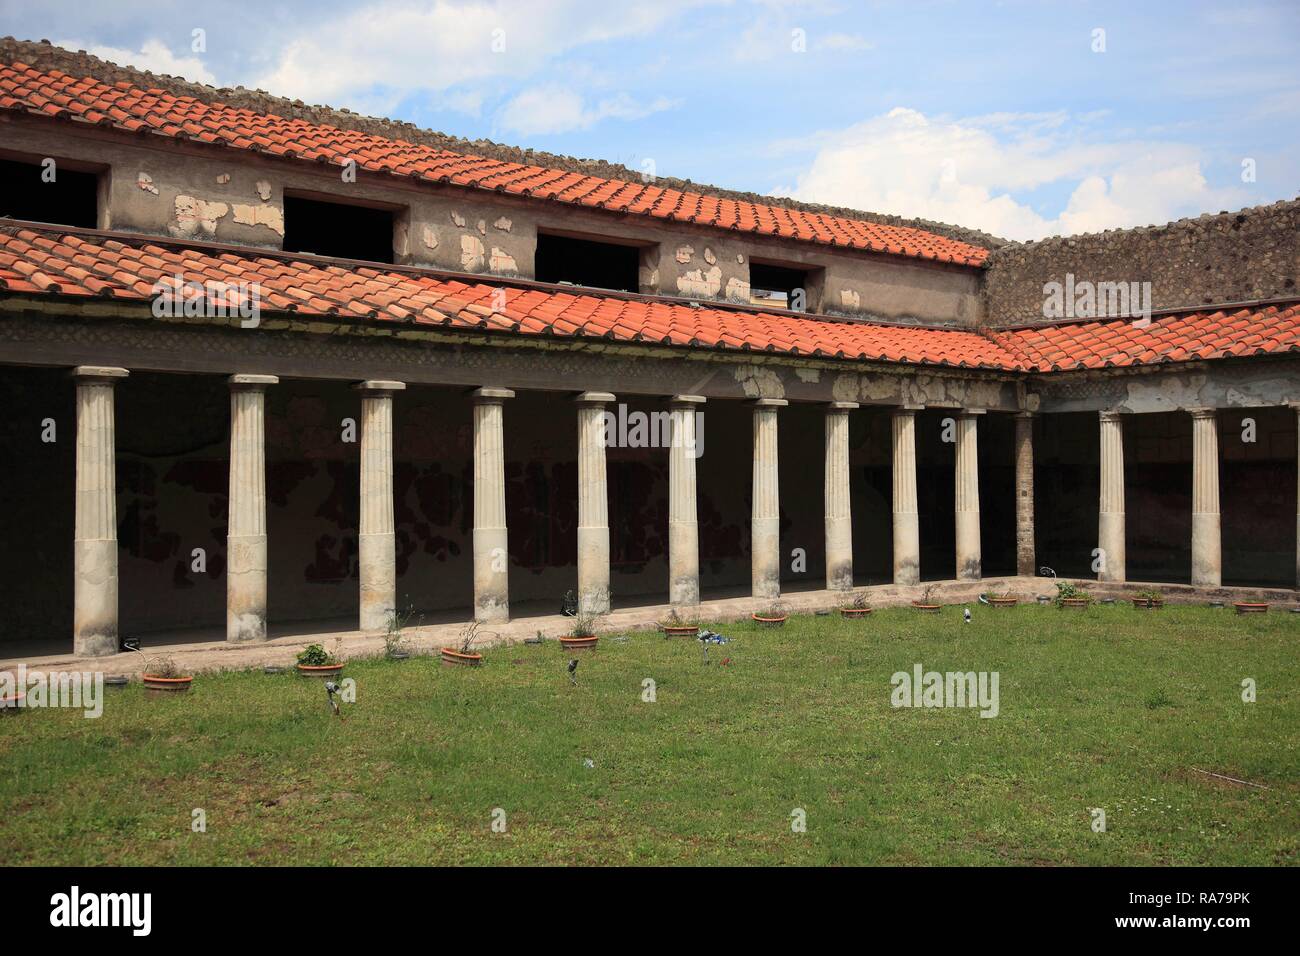 Villa of Poppea, historical town of Oplontis, now Torre Annunziata, Campania, Italy, Europe Stock Photo